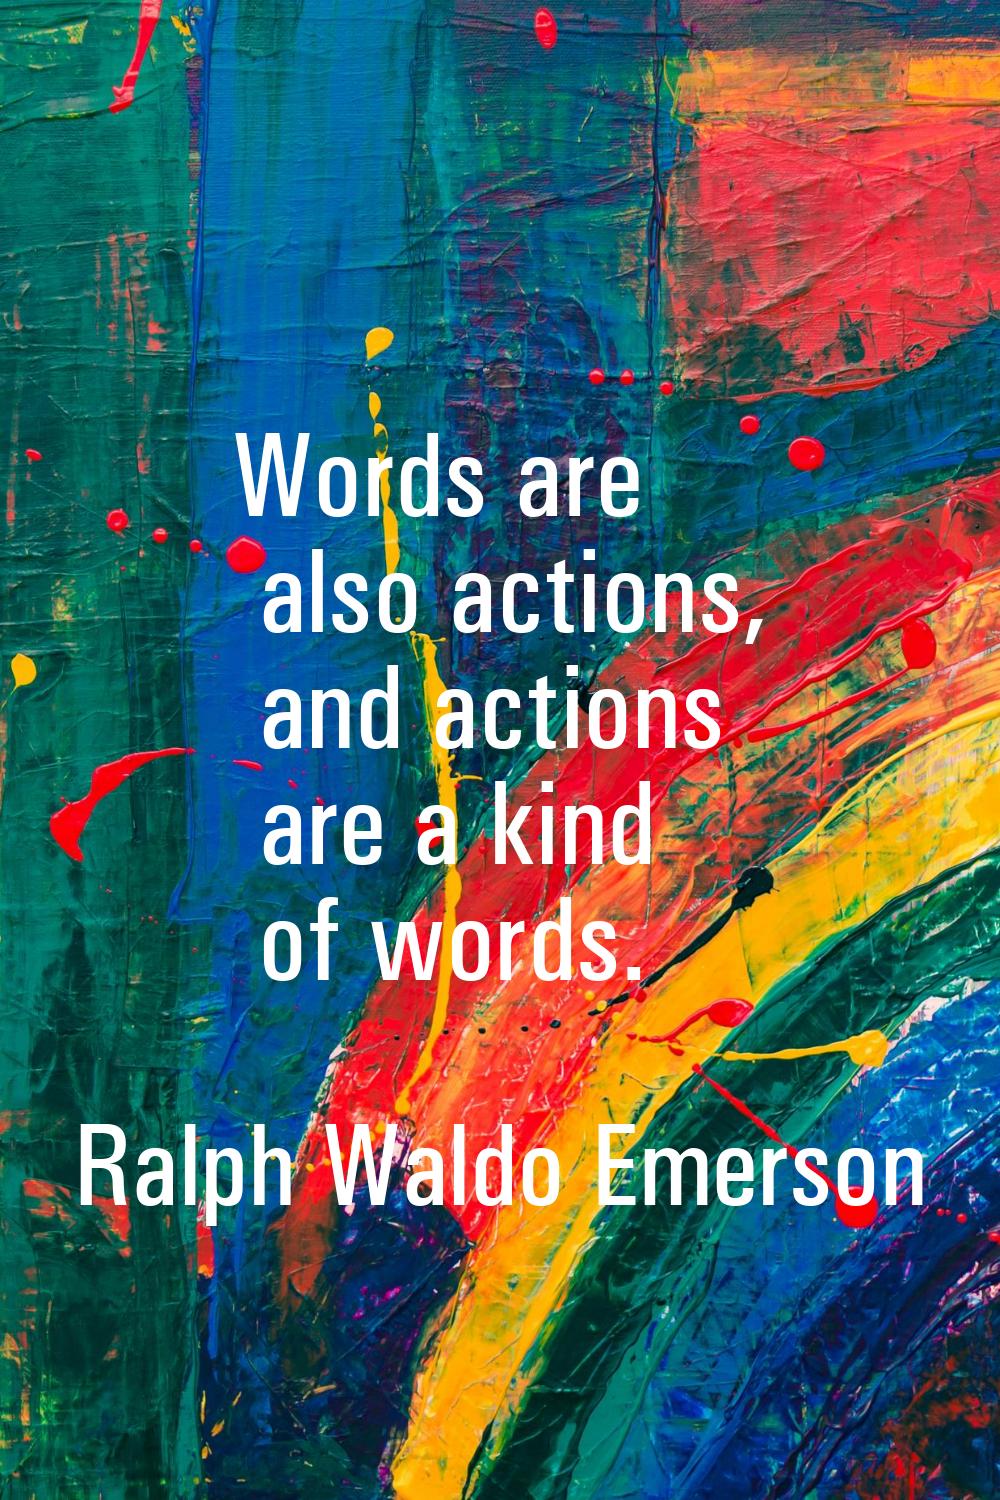 Words are also actions, and actions are a kind of words.